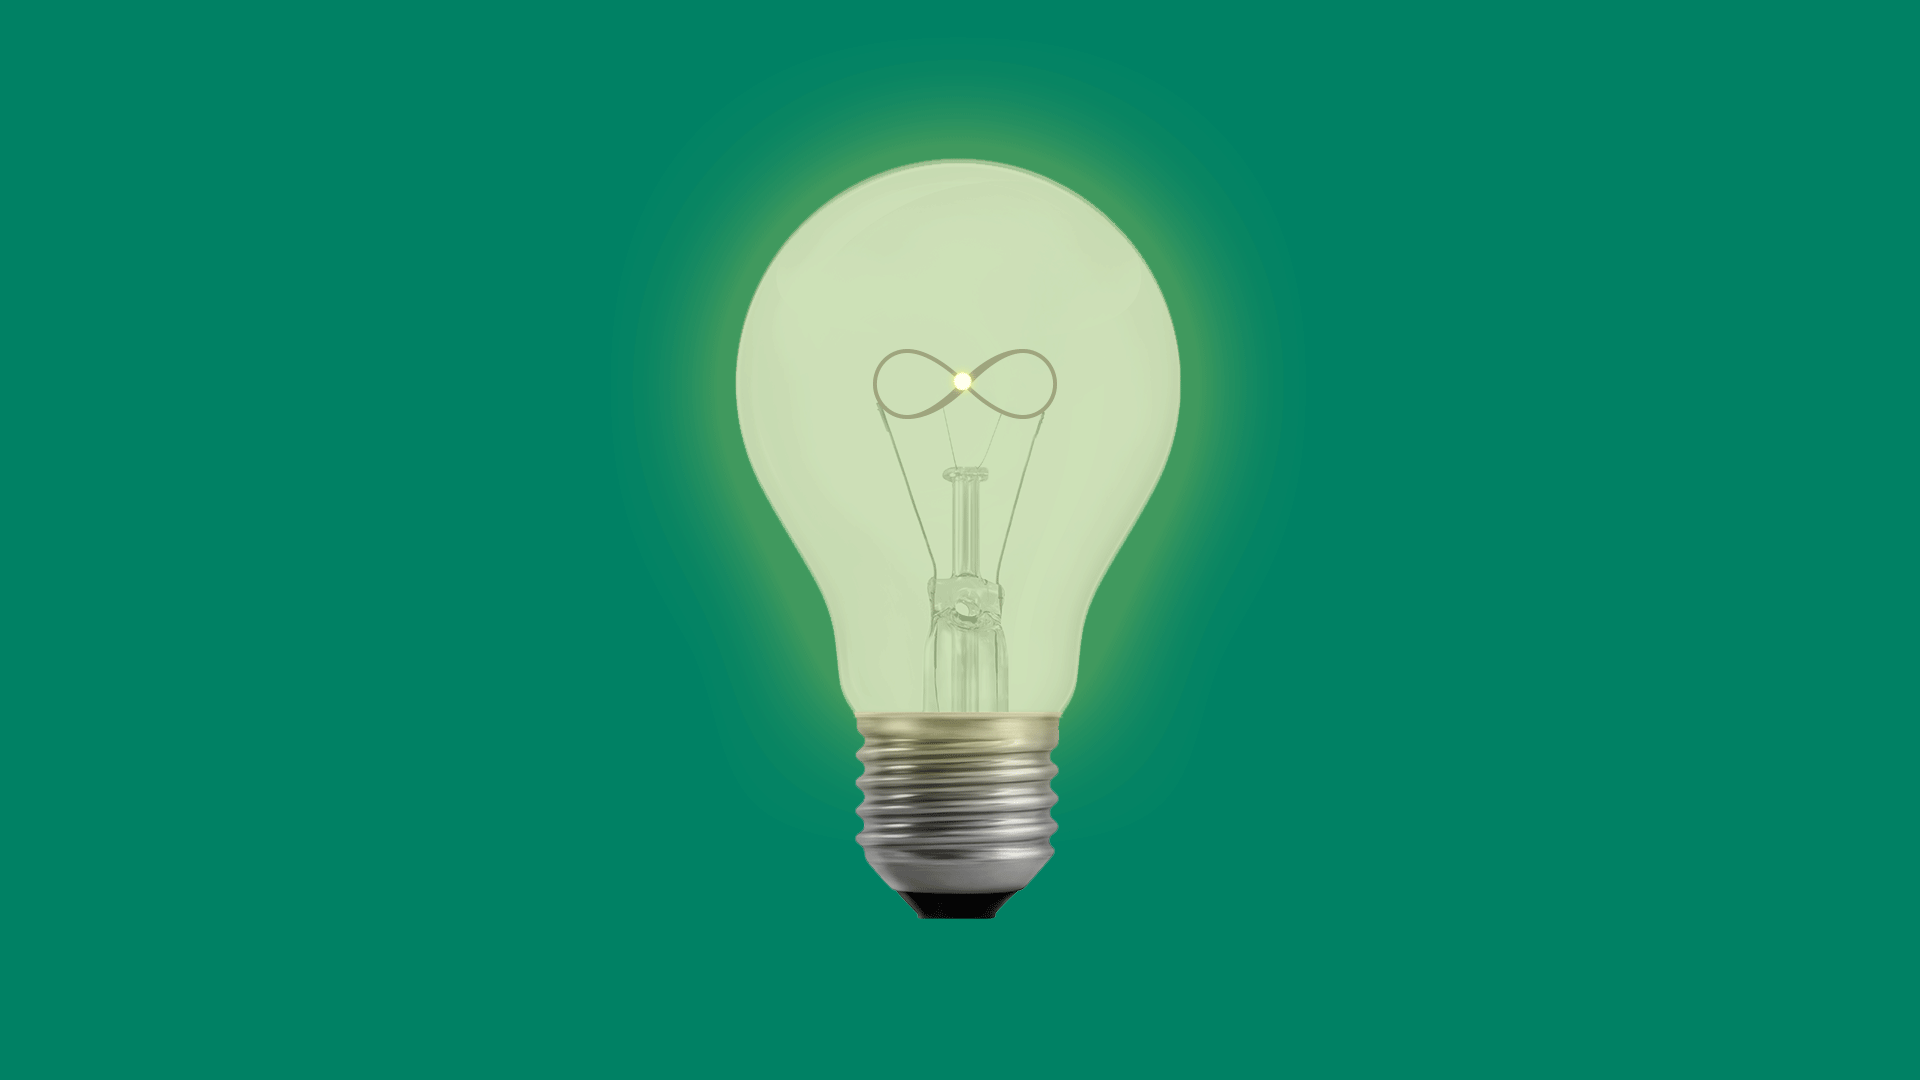 Animated illustration of a light bulb with the filament in the shape of an infinity sign. 